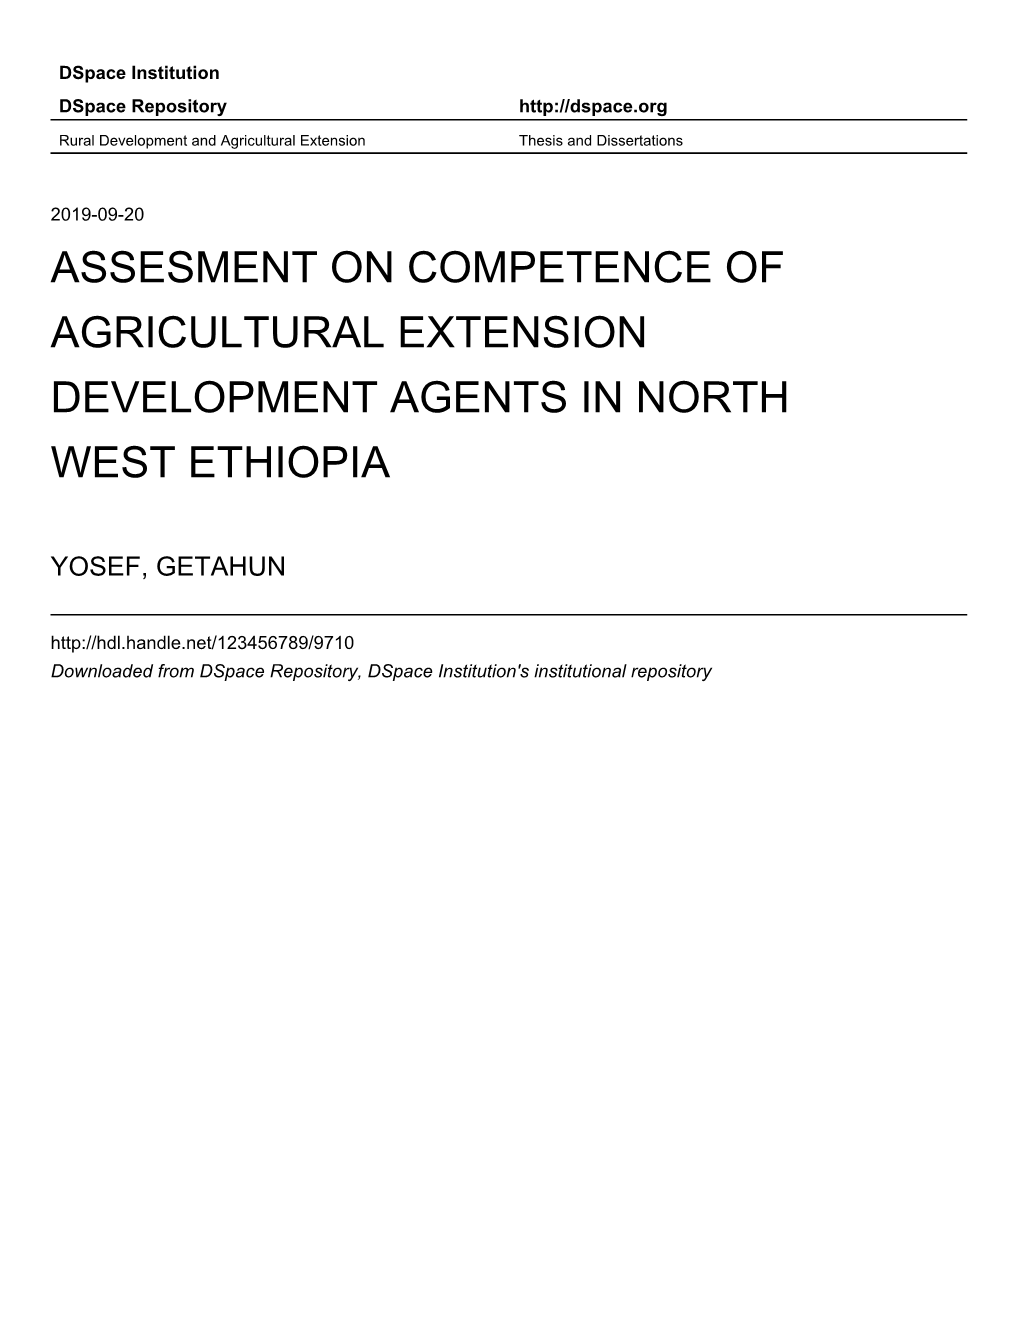 Assesment on Competence of Agricultural Extension Development Agents in North West Ethiopia